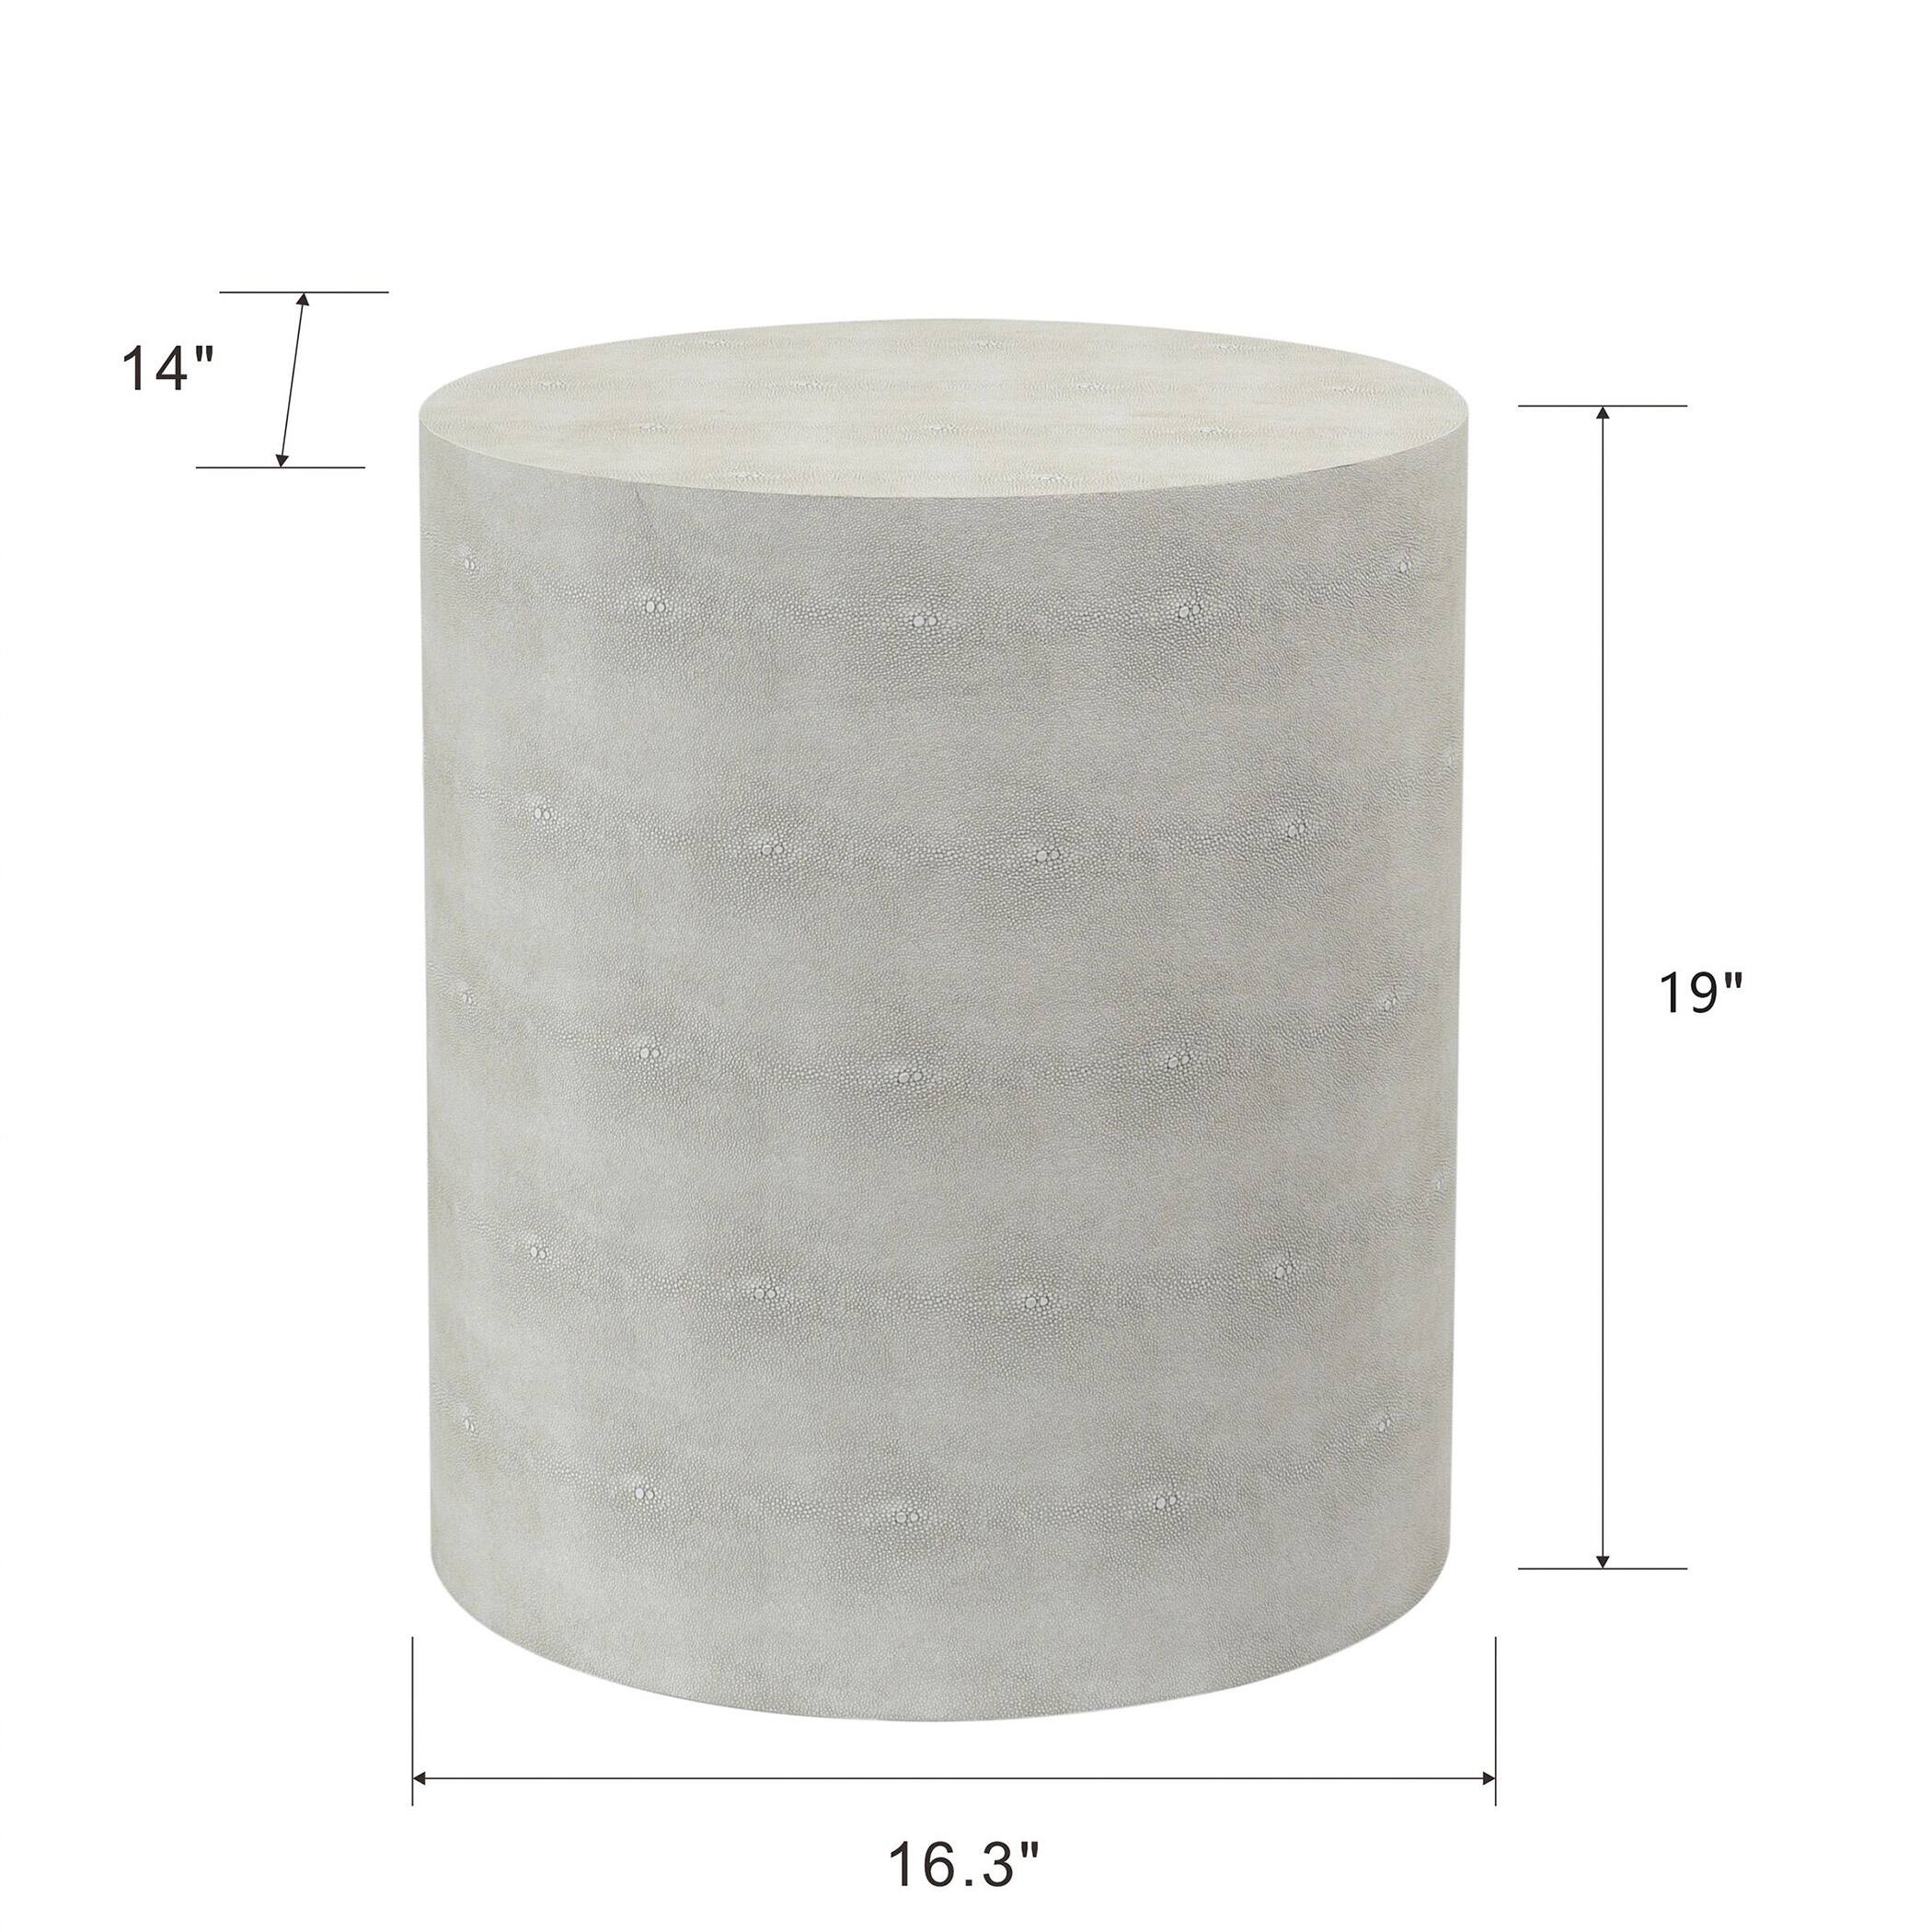 Dann Foley Lifestyle - Oval Side Table - Ivory Faux Leather Shagreen ...